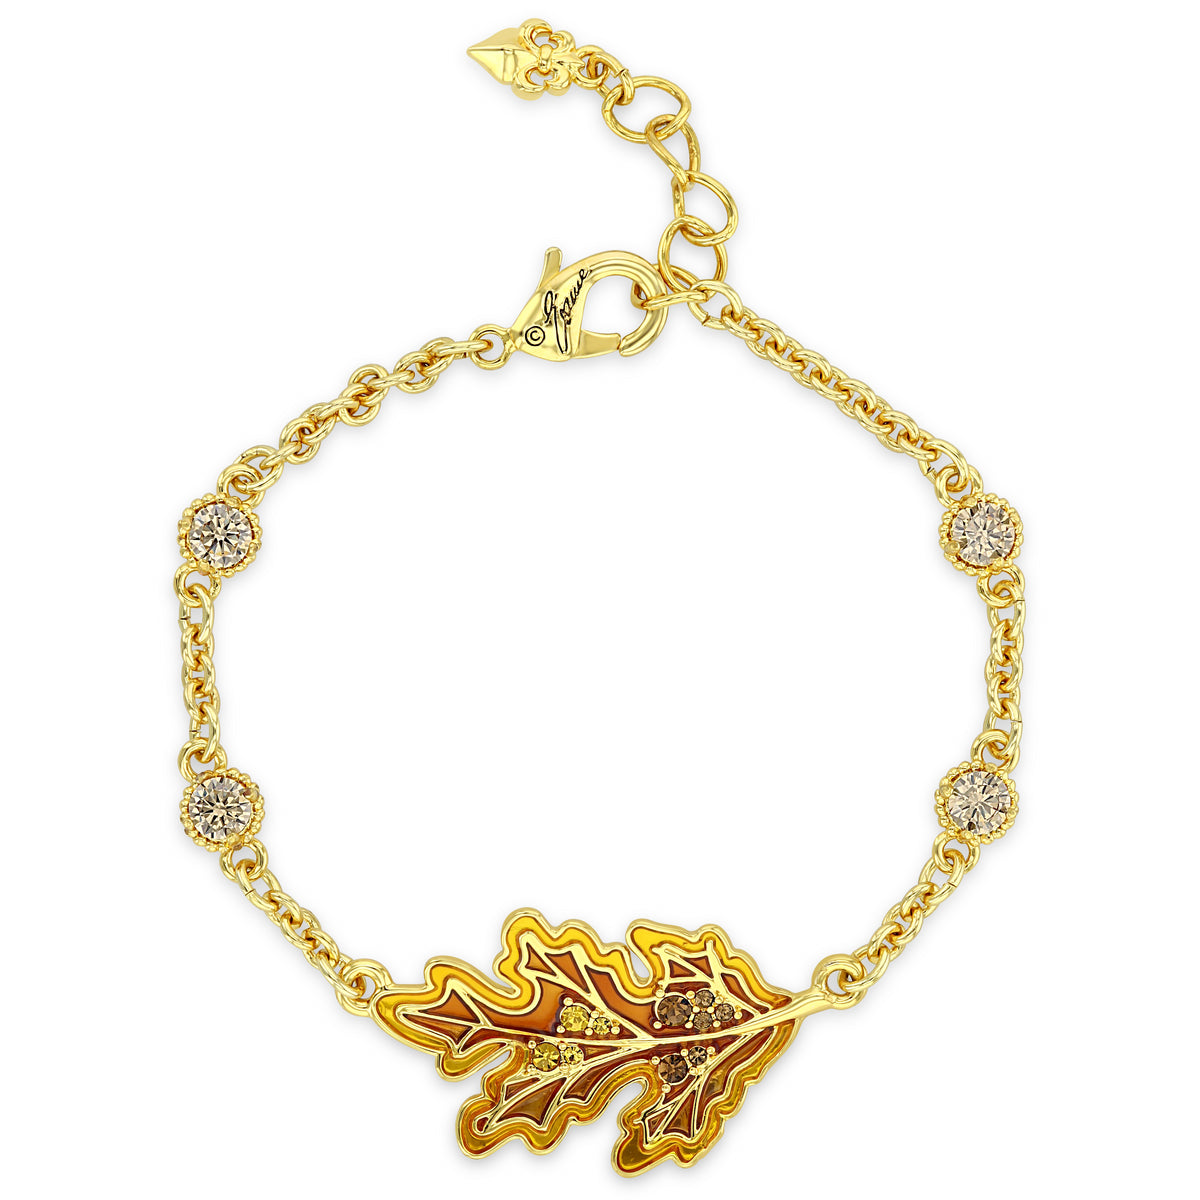 Leaf Lovers Fall Bundle for Autumn by Ritzy Couture DeLuxe - 18k Gold Plated Brass